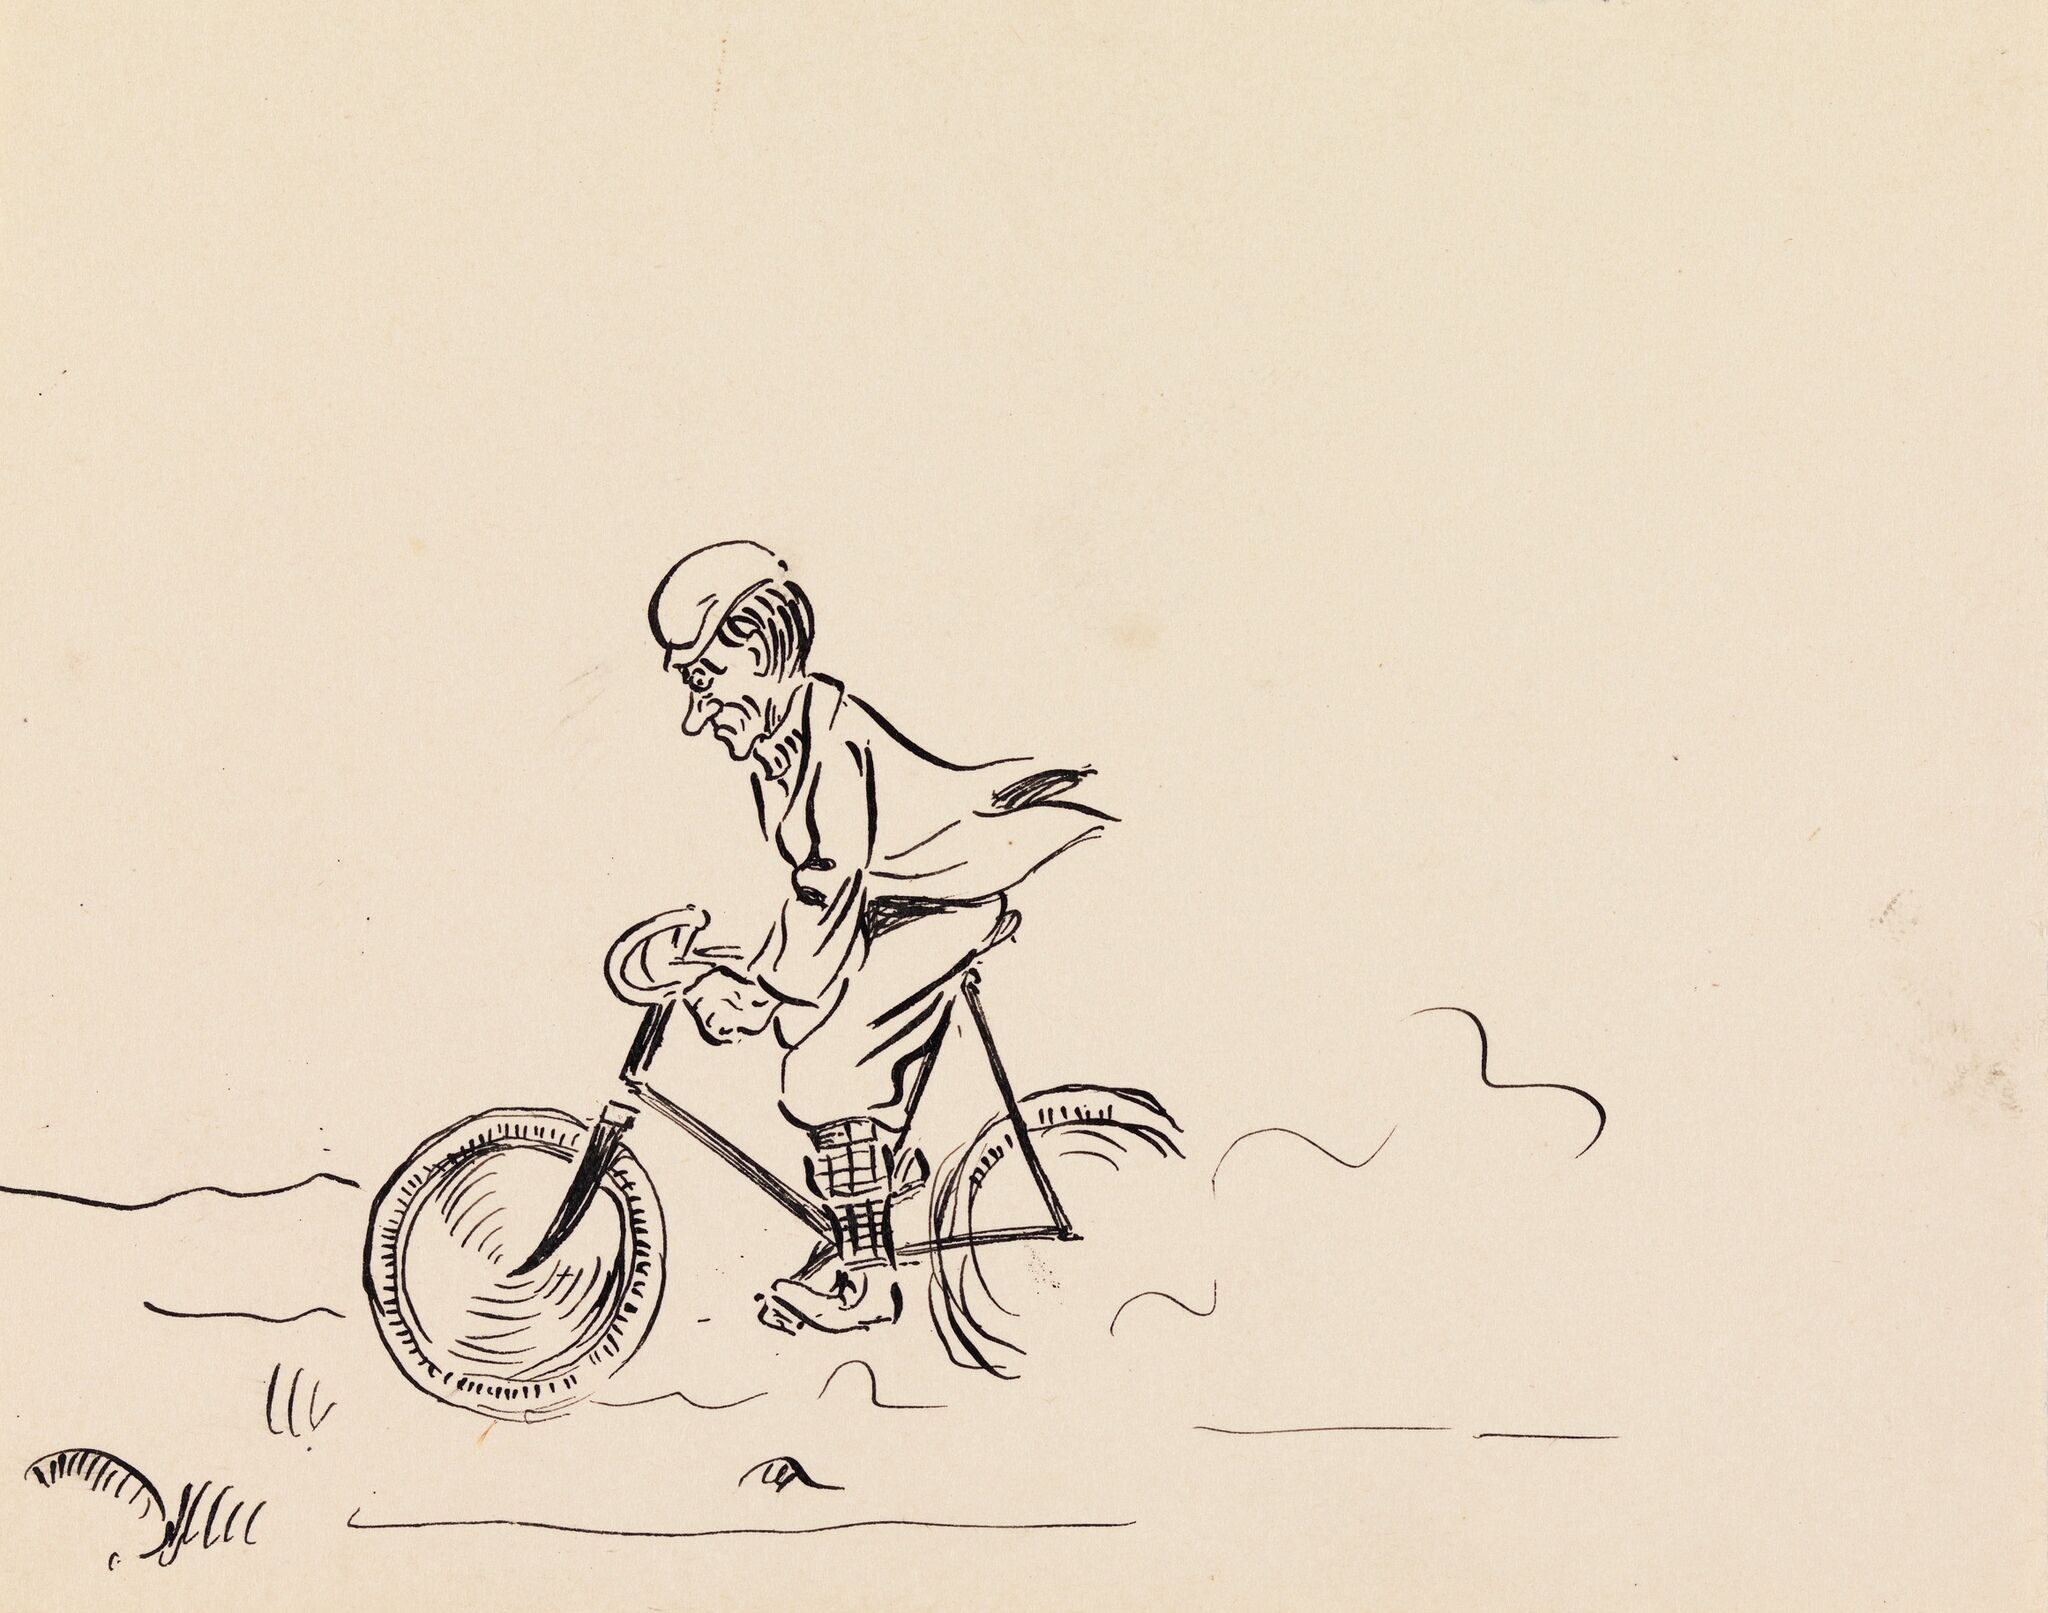 A sketch of a person riding a bicycle, wearing a helmet and plaid pants, with a determined expression, against a plain background.